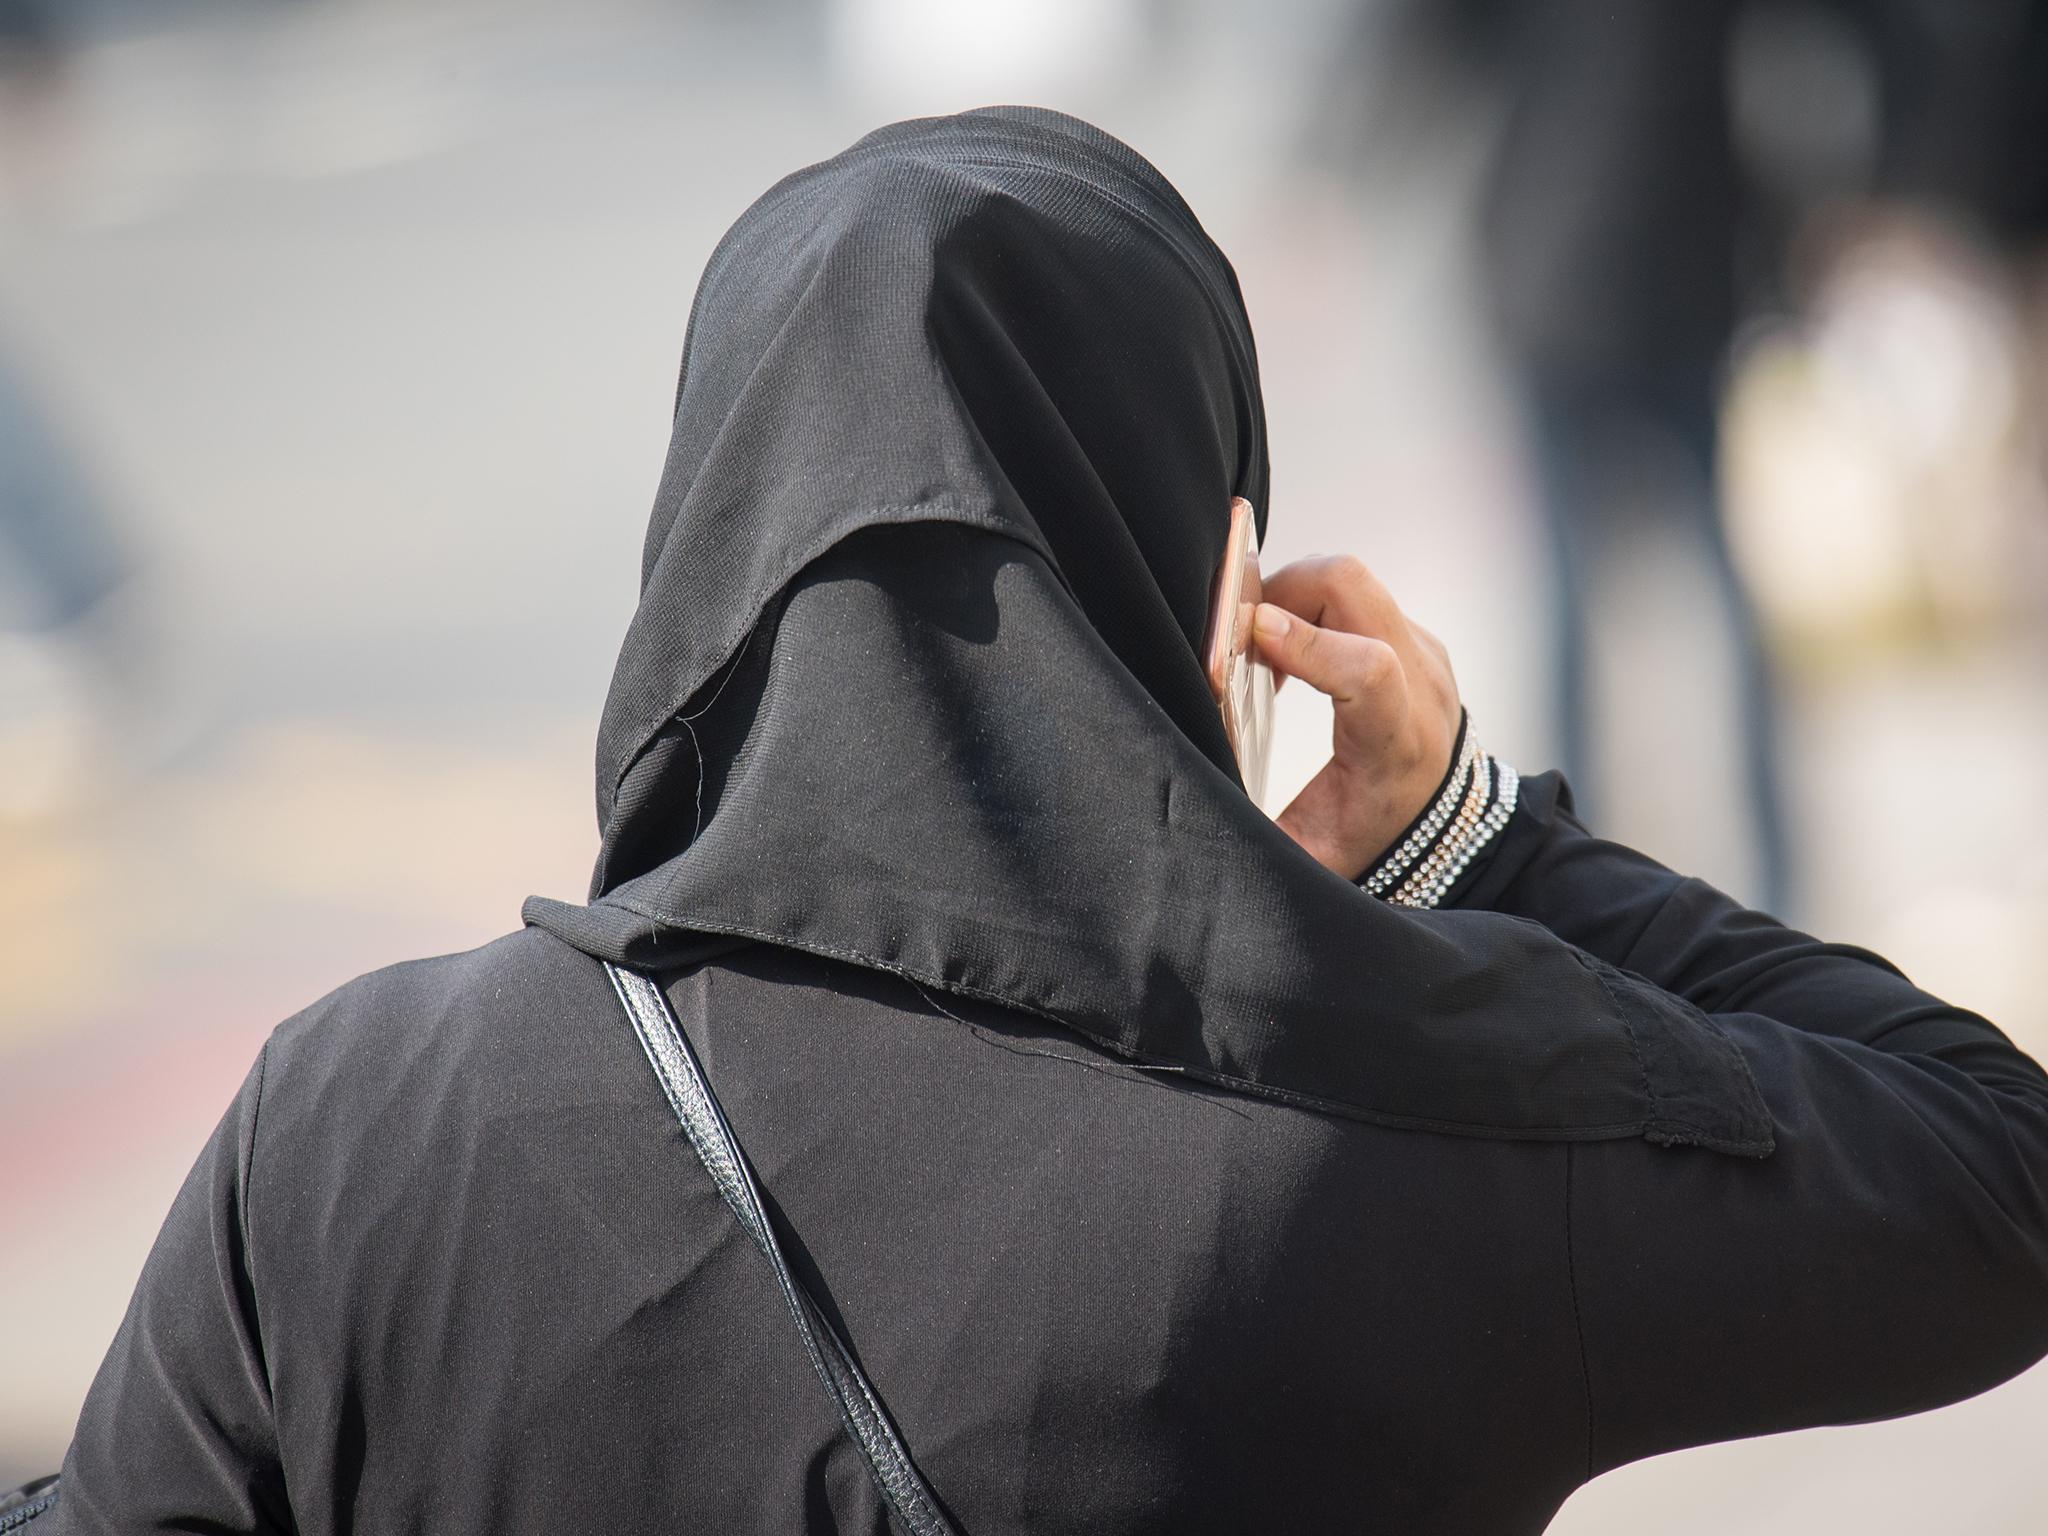 Women who wear a traditional Islamic garments, such as a hijab, niqab or jilbab, were significantly more likely worry about abuse